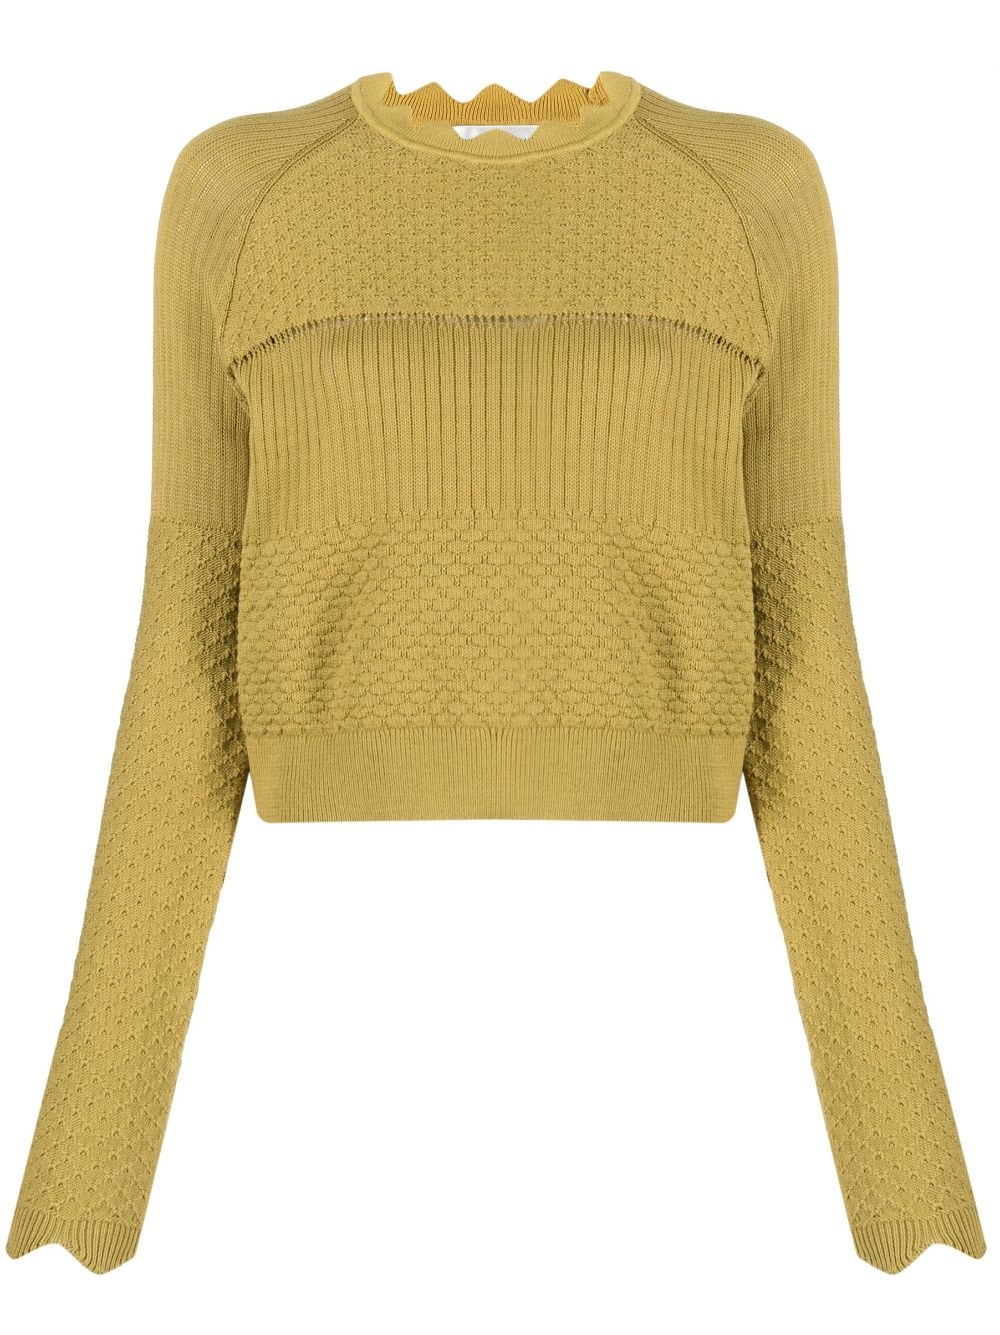 panelled knitted jumper